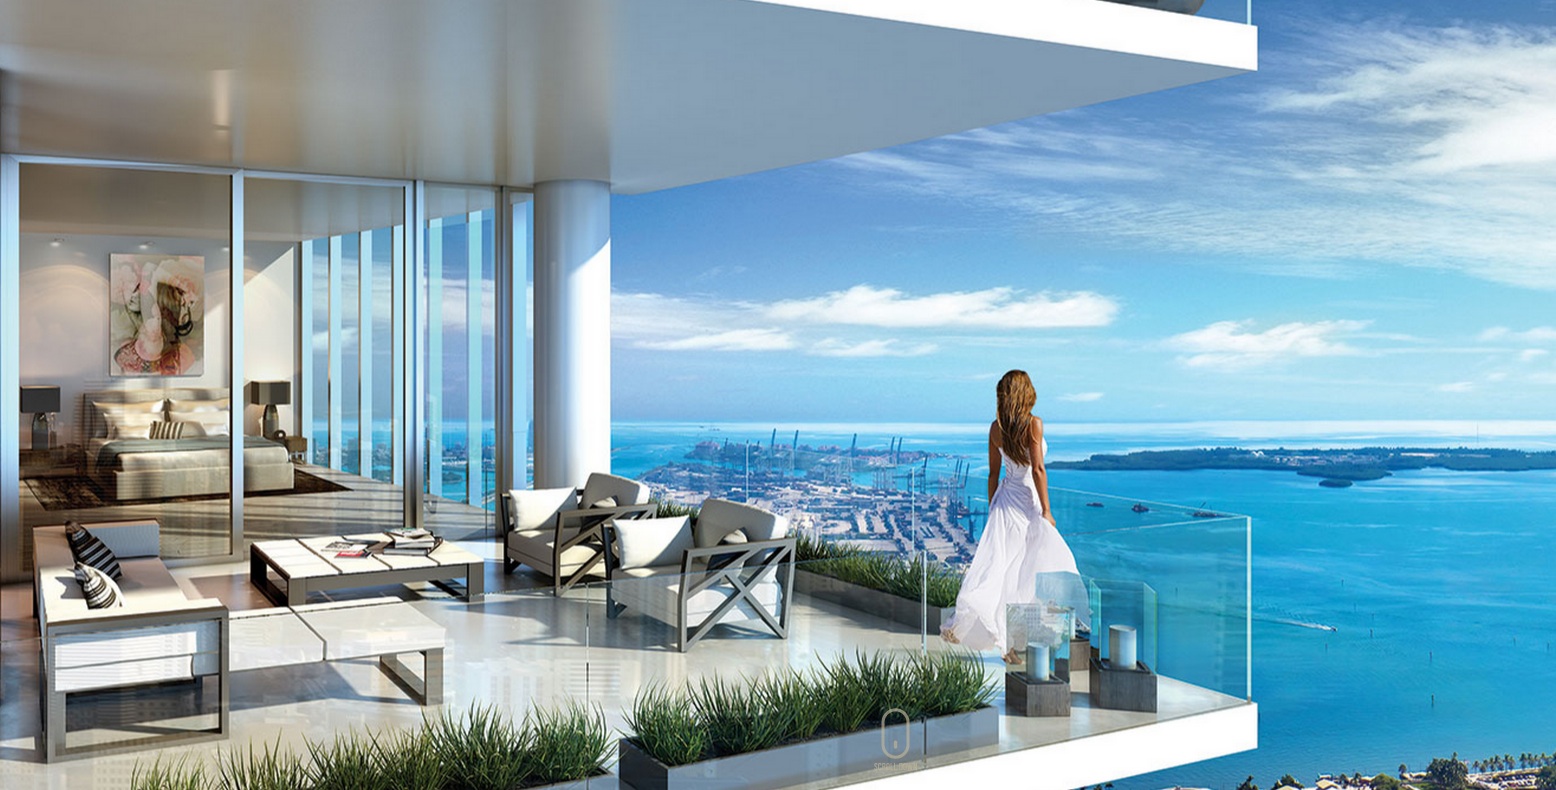 Miami developers are designing luxury housing to cater to out-of-town buyers and renters